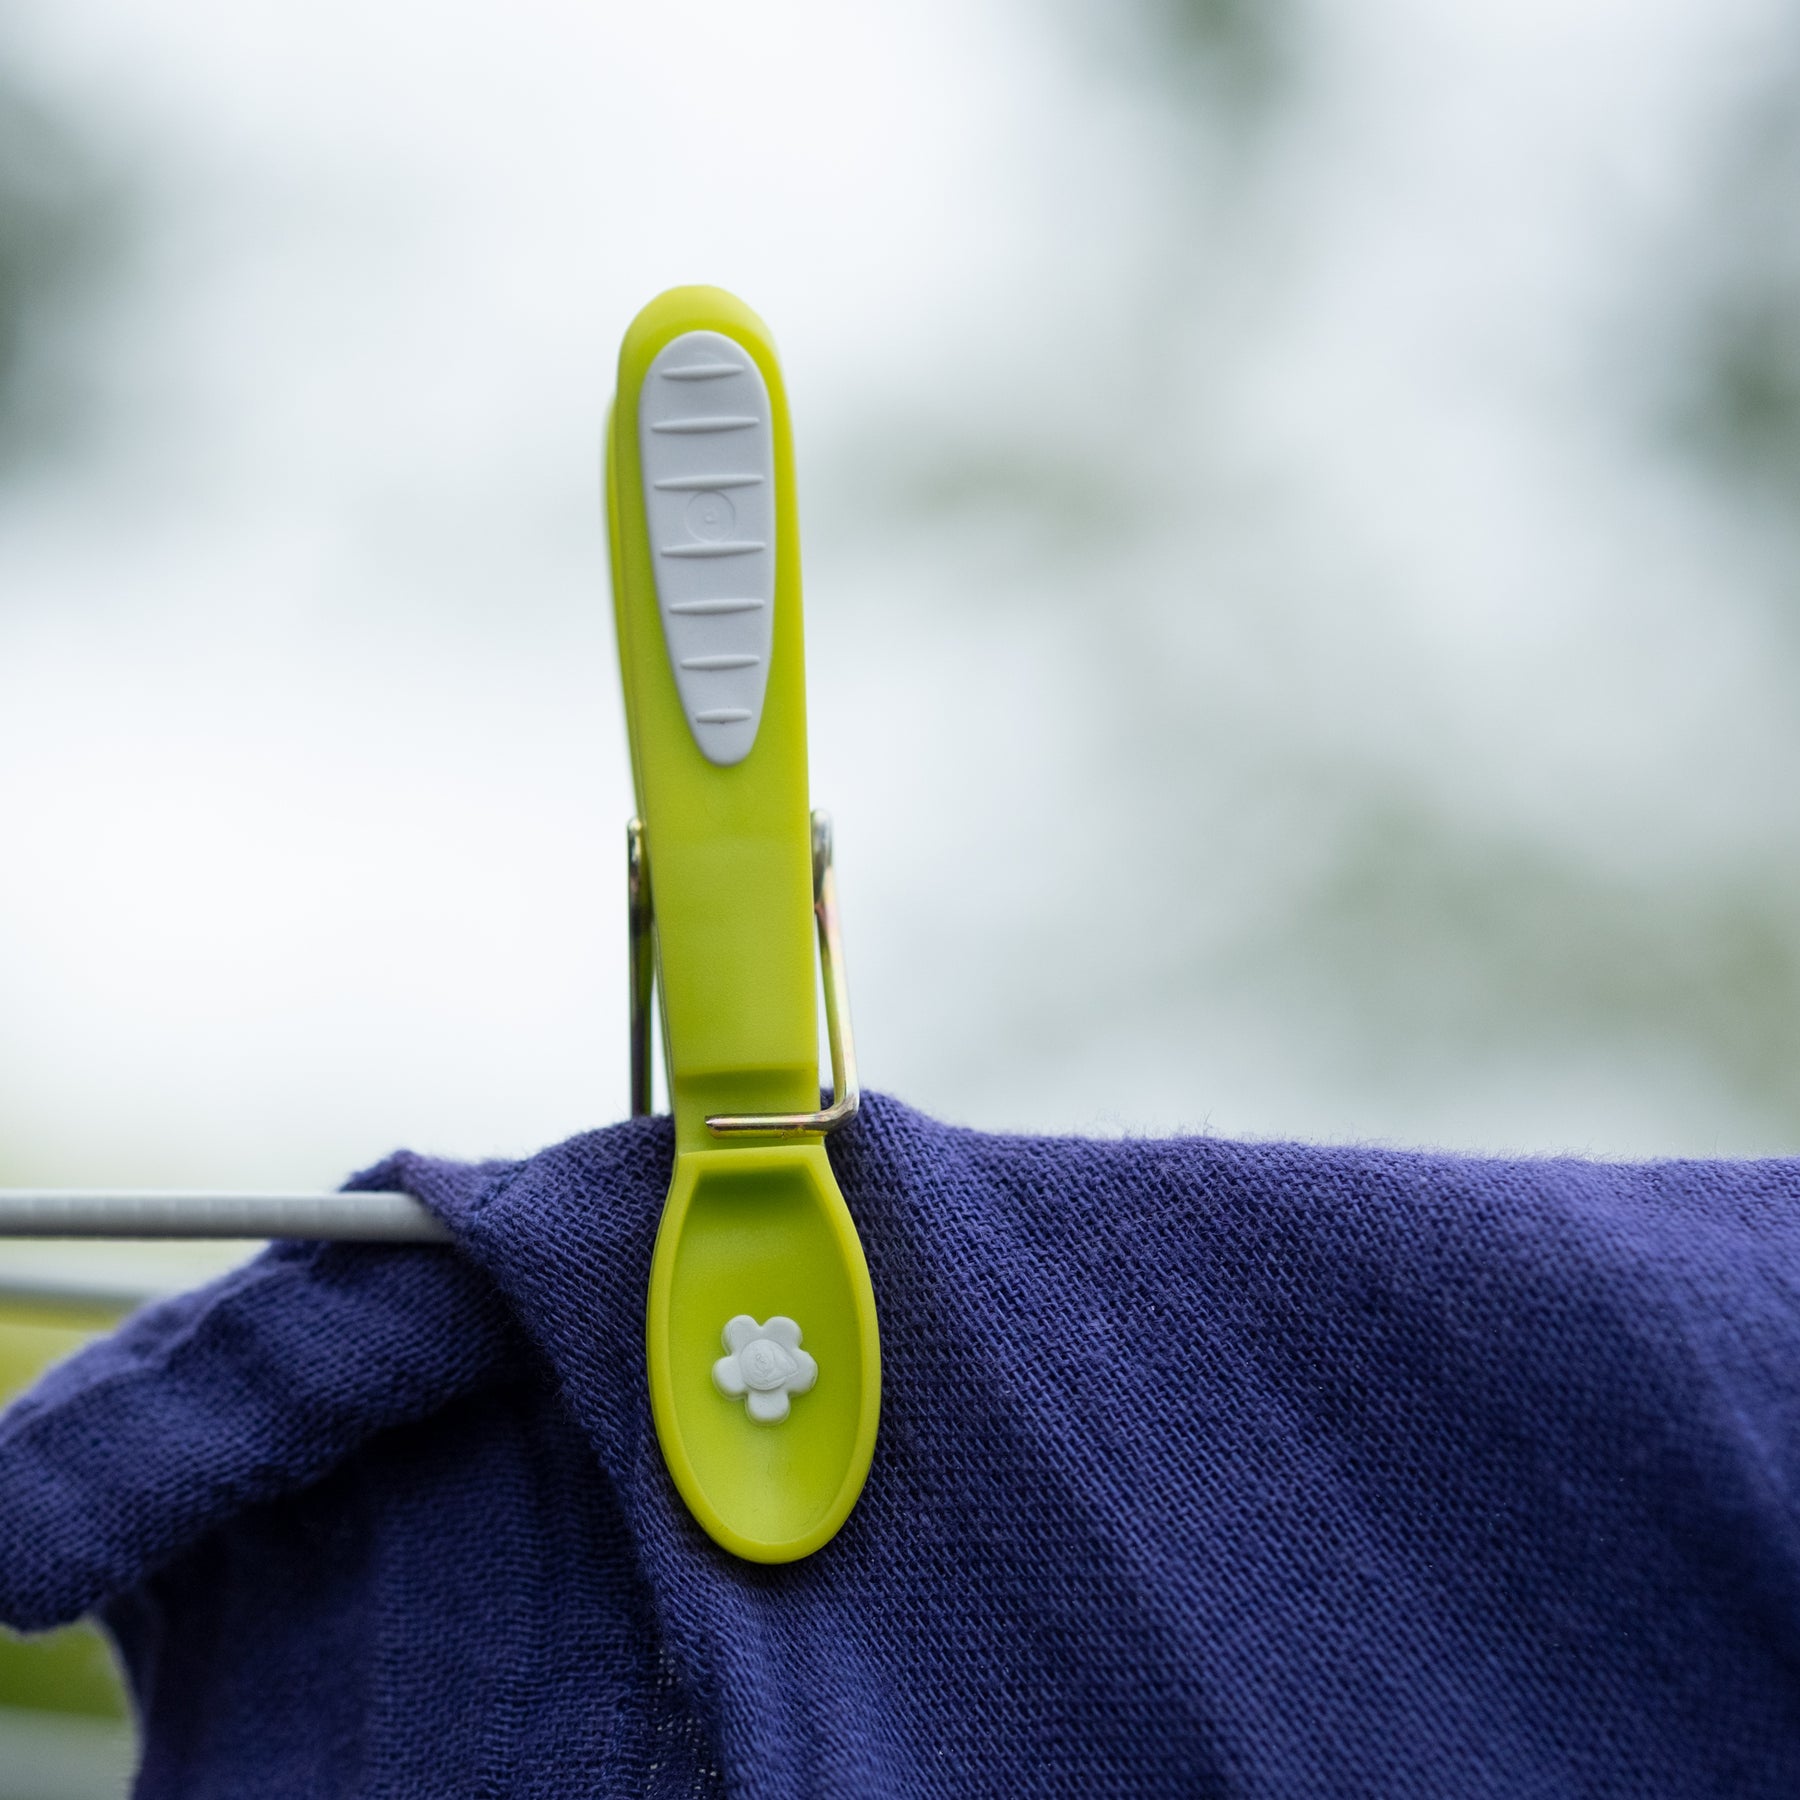 Heavy-duty clothes line pegs